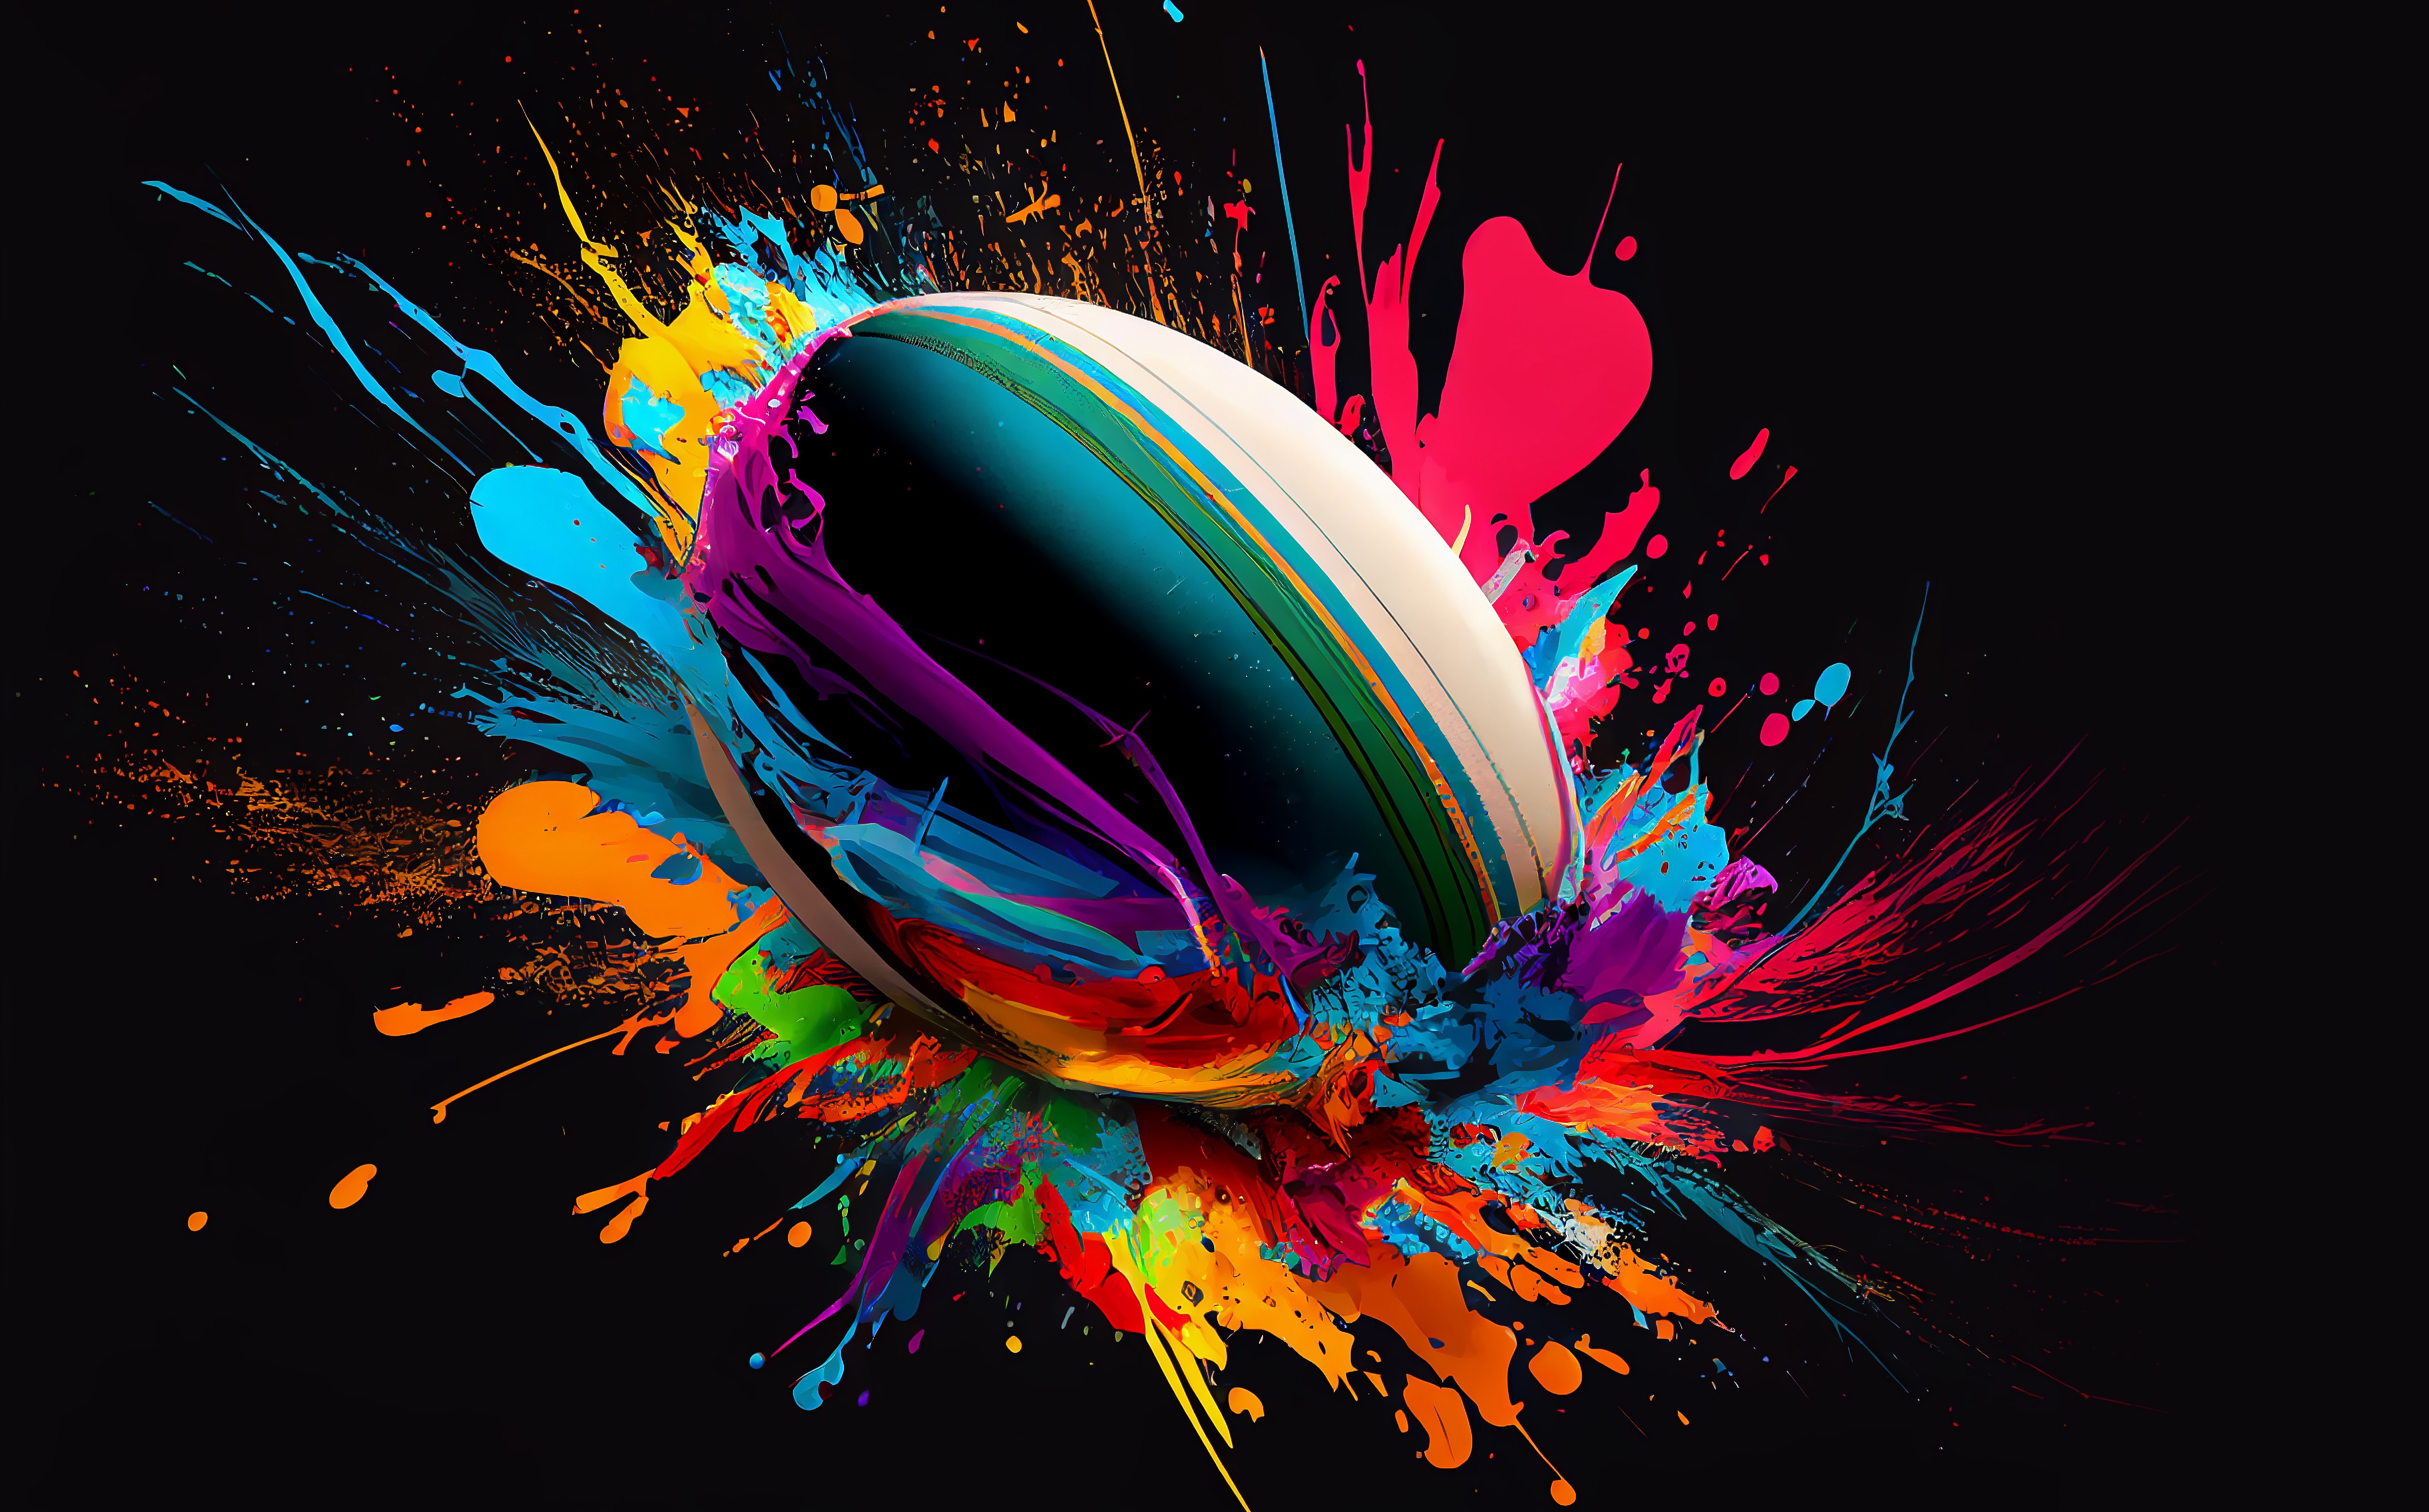 vibrant paint of varying colors splashed by a rugby ball.